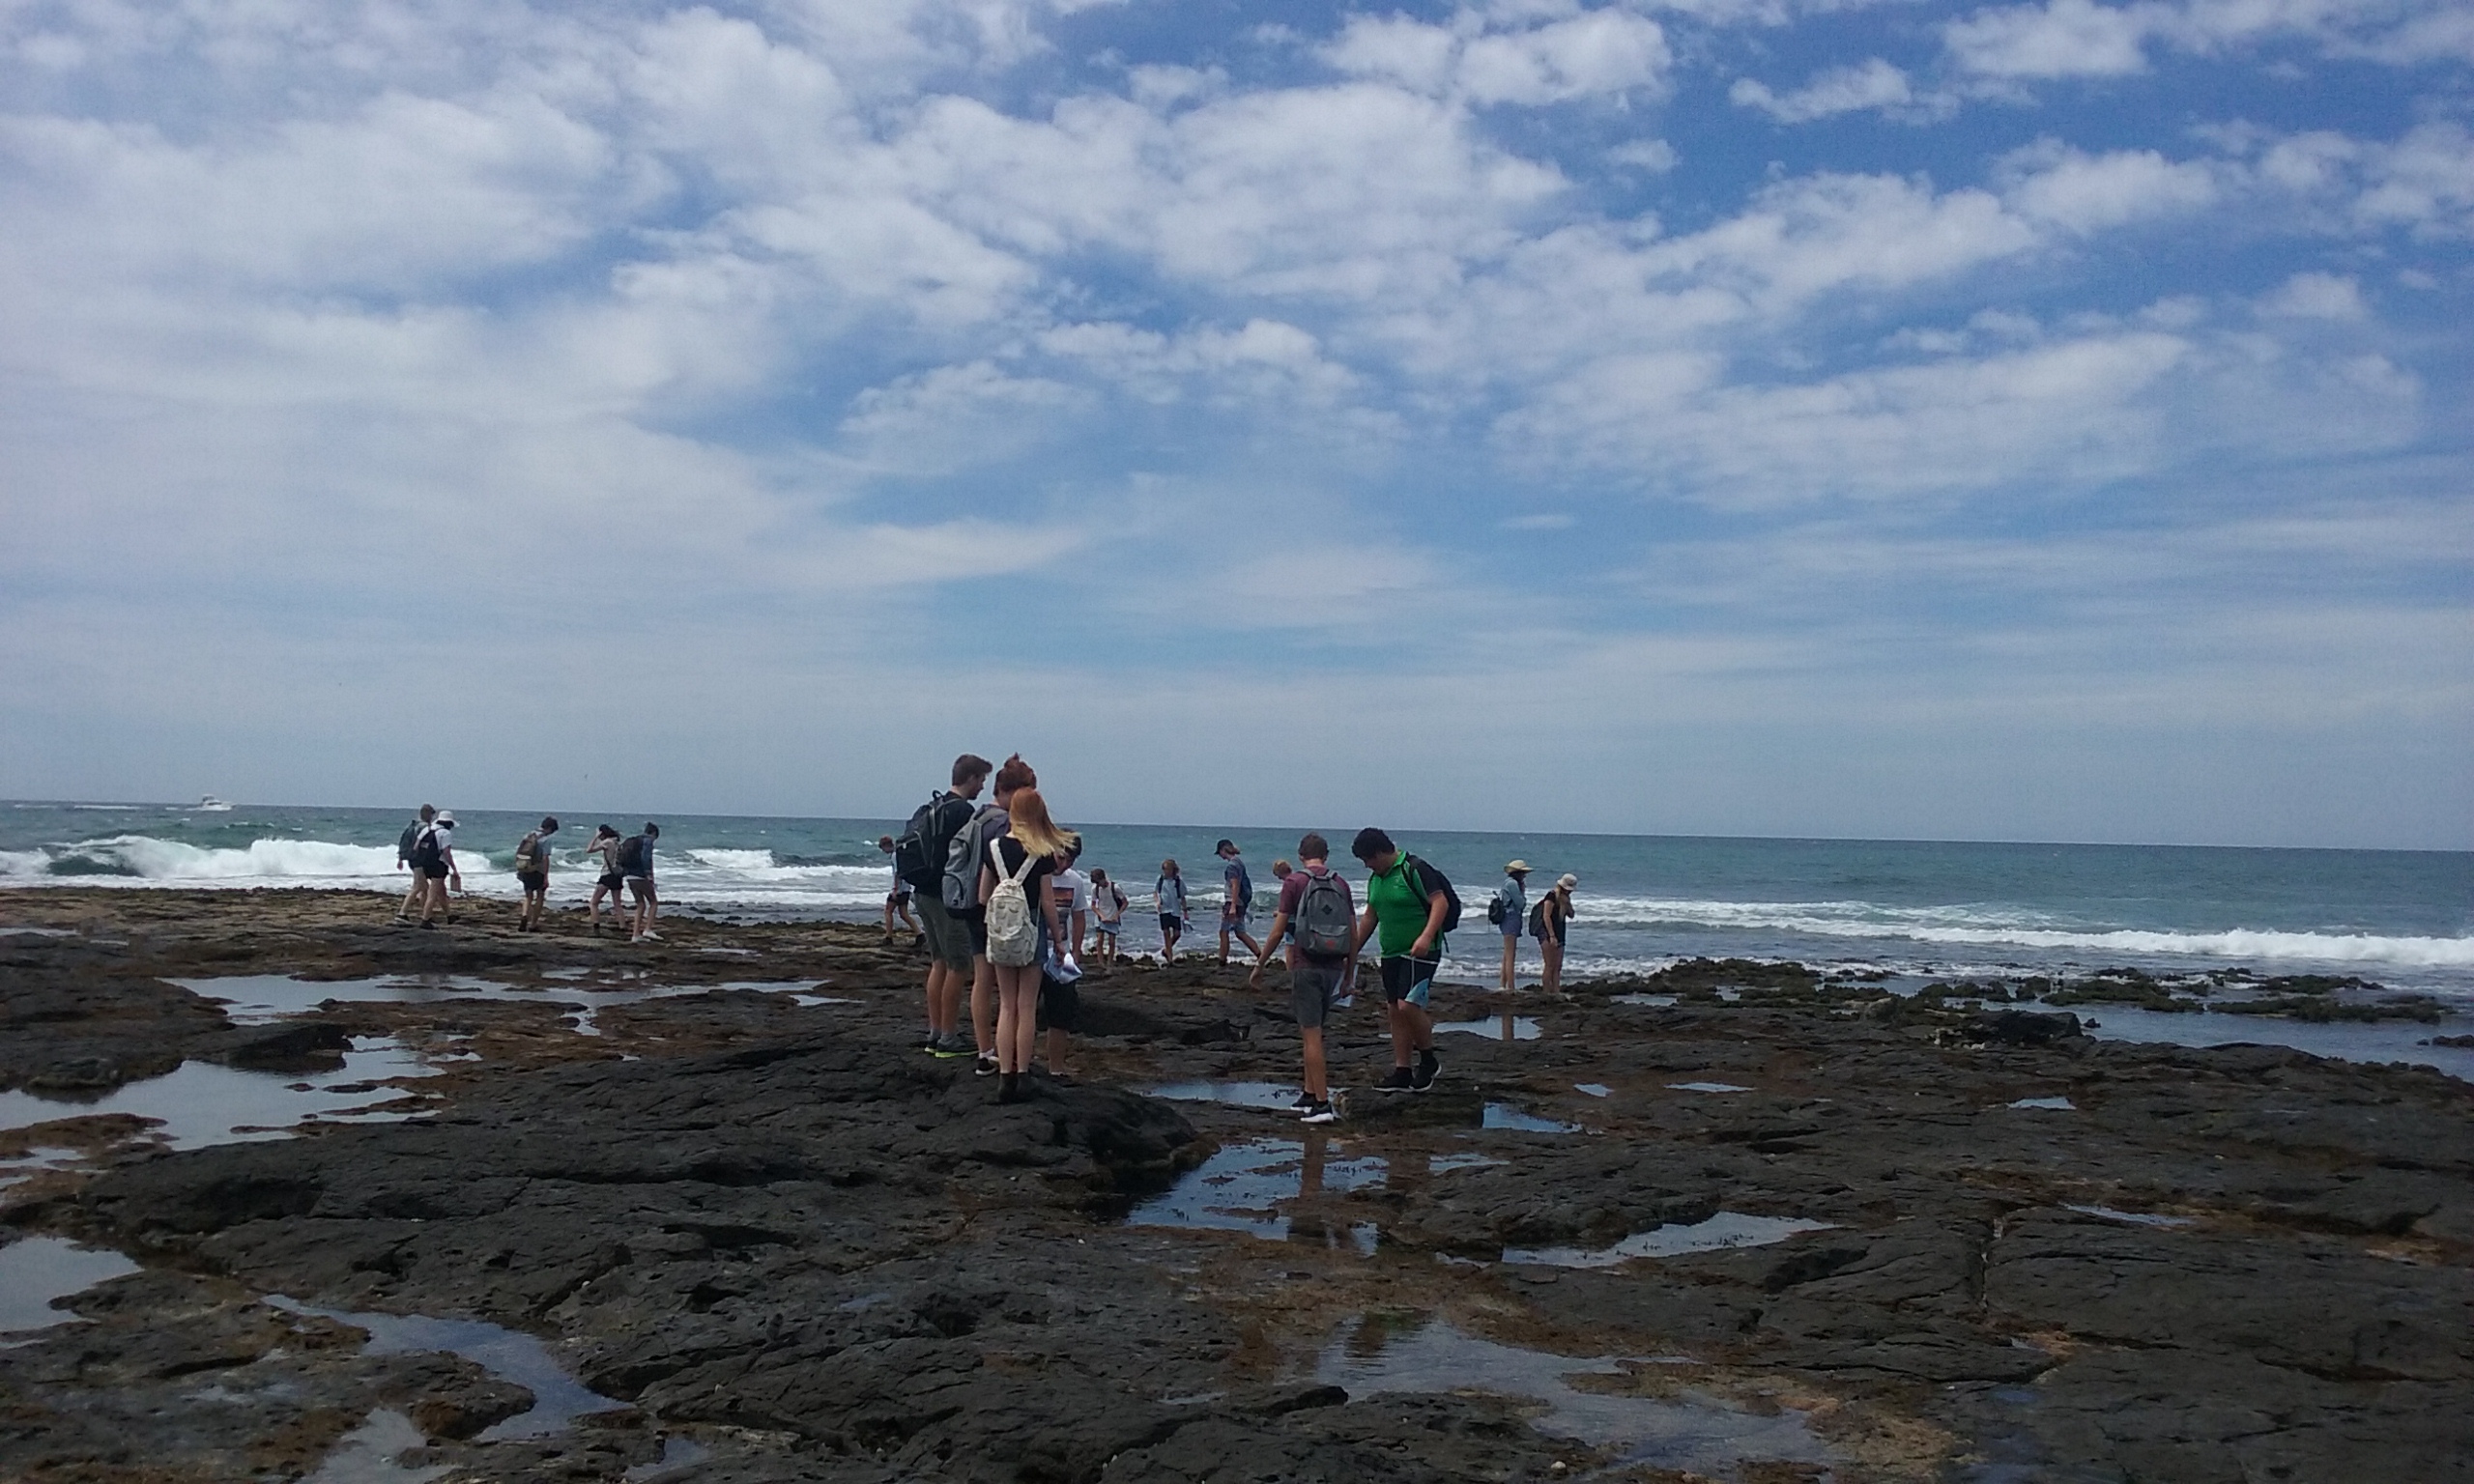 Blue sky and rock pools all over the ground. Sea in the distance. Students walk on top of the rocks looking down at the ecosystems.